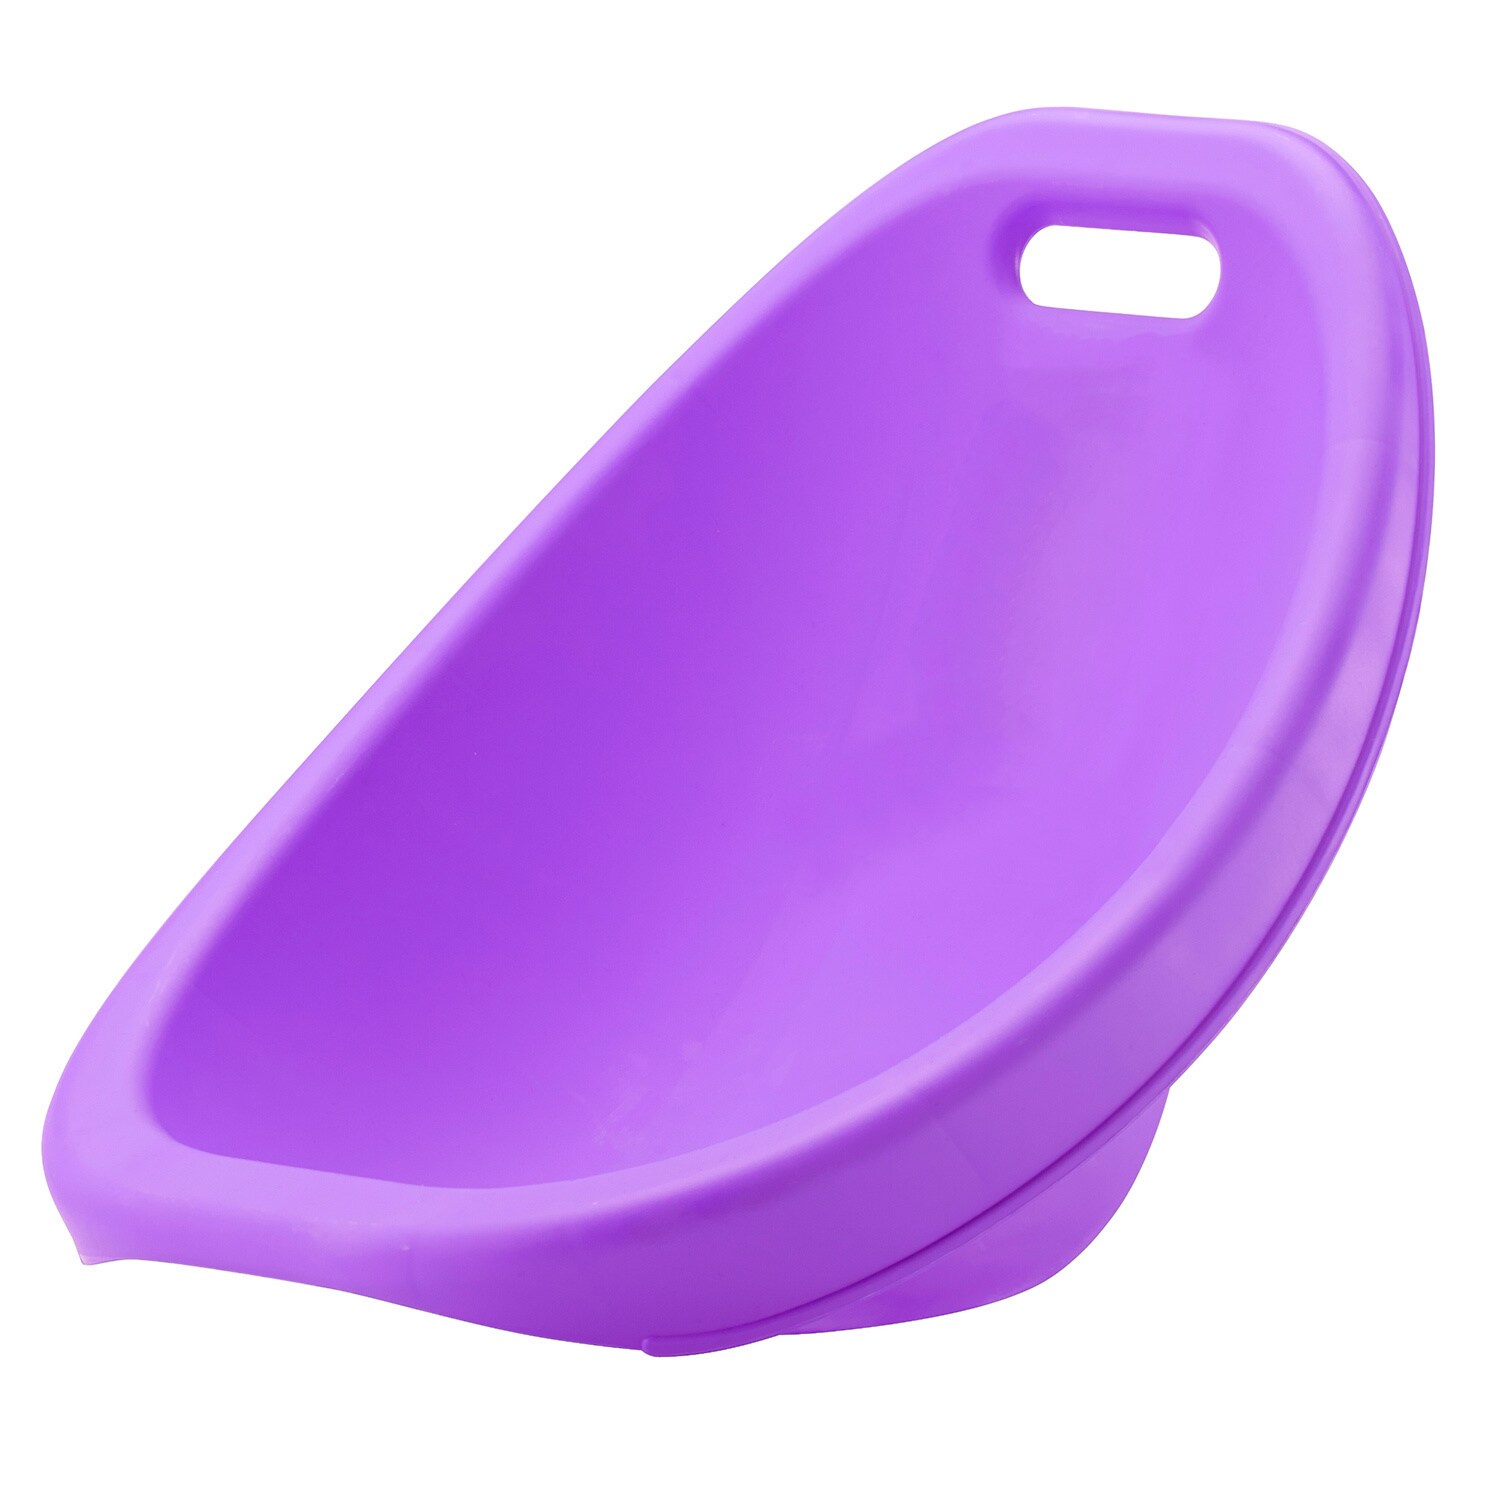 https://ak1.ostkcdn.com/images/products/10763496/American-Plastic-Toys-Scoop-Rocker-Assorted-colors-Pack-of-6-As-Is-Item-9697f147-4feb-403a-b13c-ccfb44be09f3.jpg